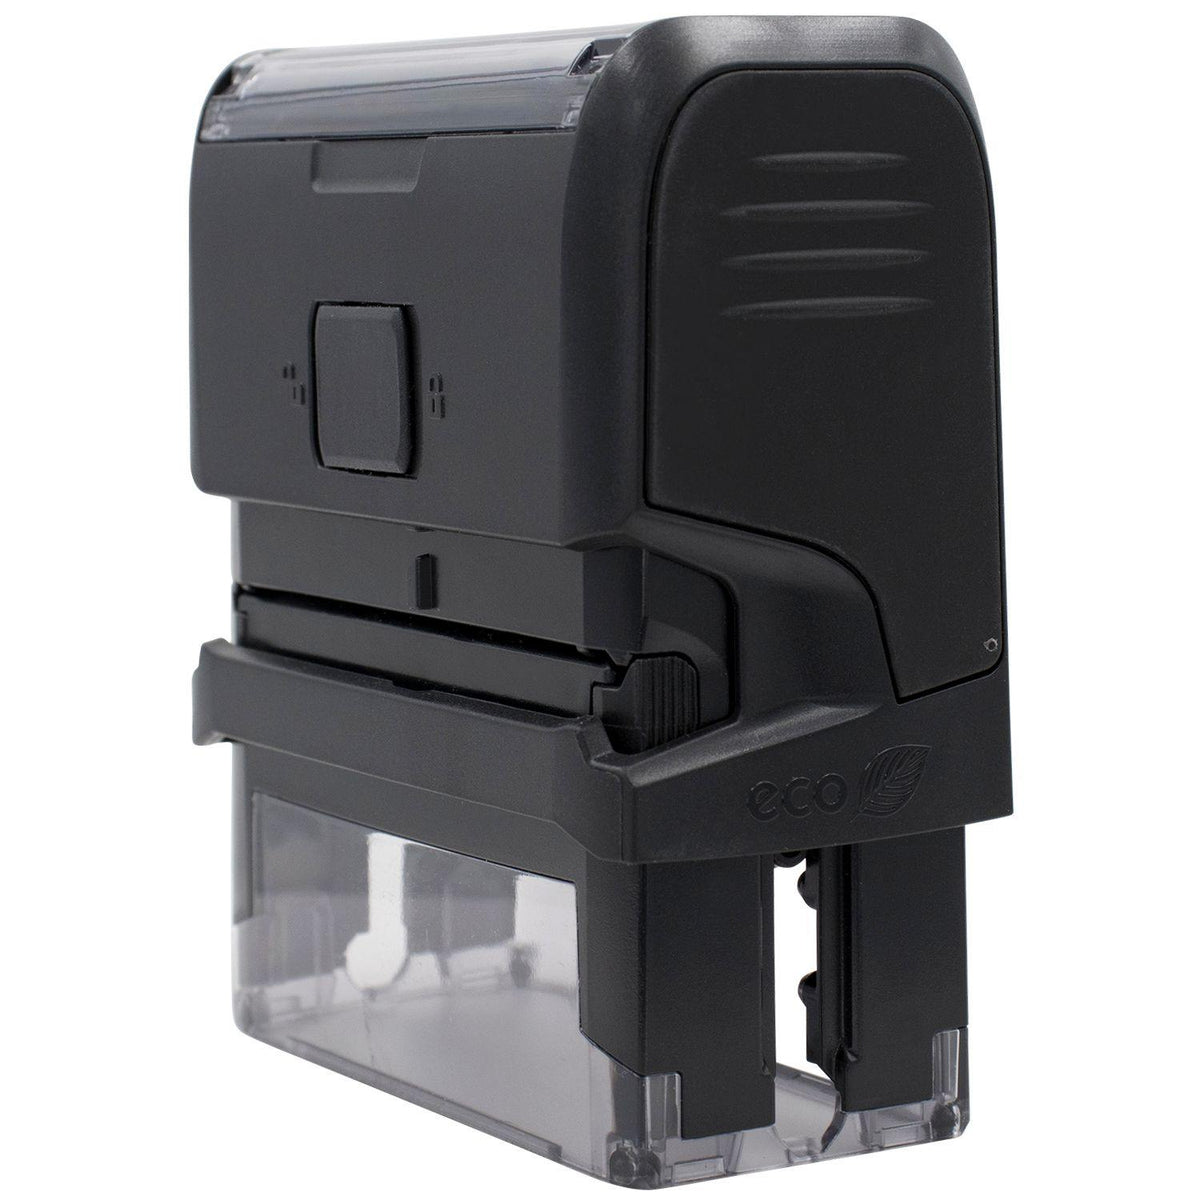 Large Self Inking Outline Copy Stamp - Engineer Seal Stamps - Brand_Trodat, Impression Size_Large, Stamp Type_Self-Inking Stamp, Type of Use_Office, Type of Use_Professional